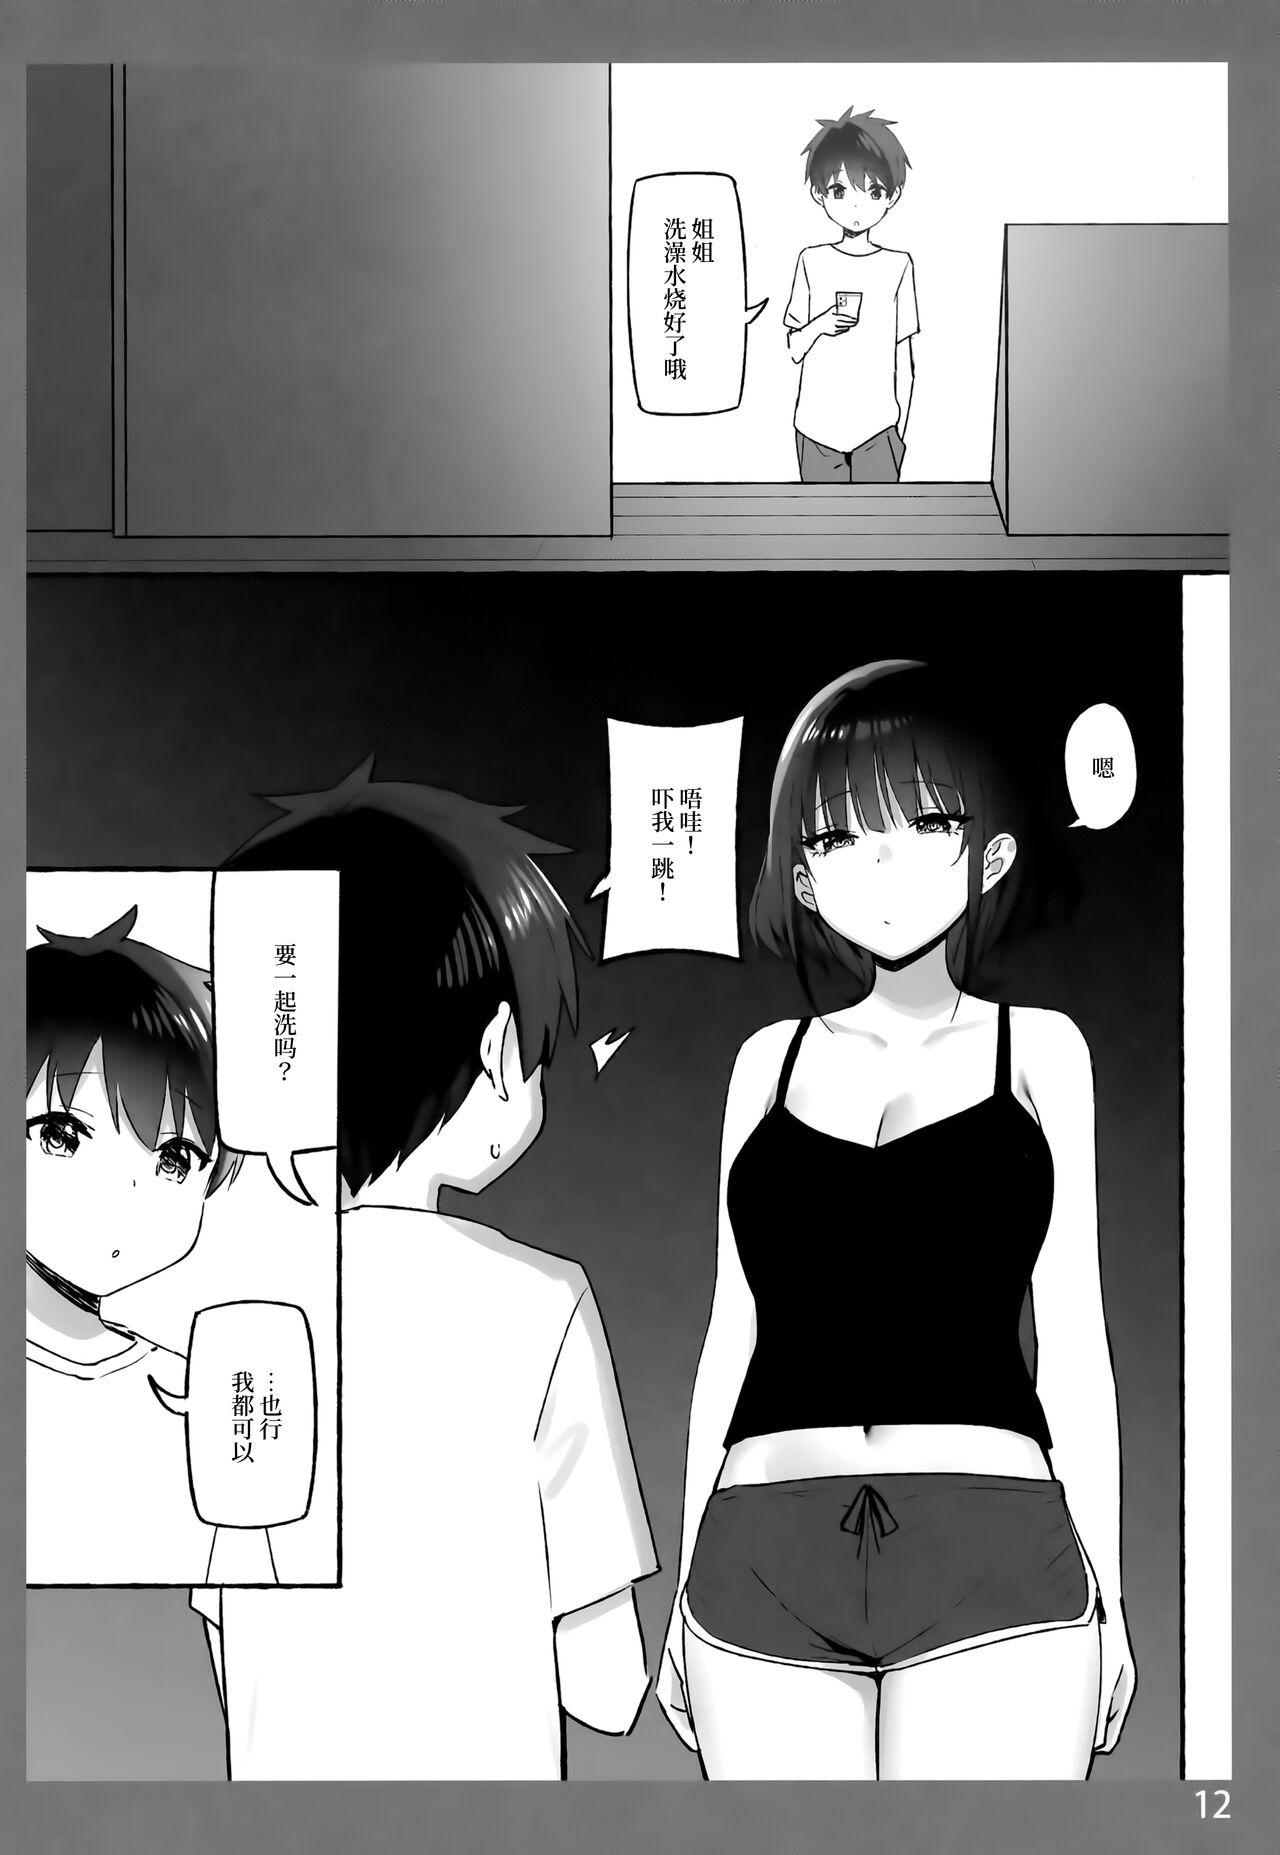 Tetas [Candy Club (Sky)] Onee-chan to Torokeru Kimochi SP | The Melting Feeling with Onee-chan SP [Chinese] [白杨汉化组] - Original Sexo - Page 11